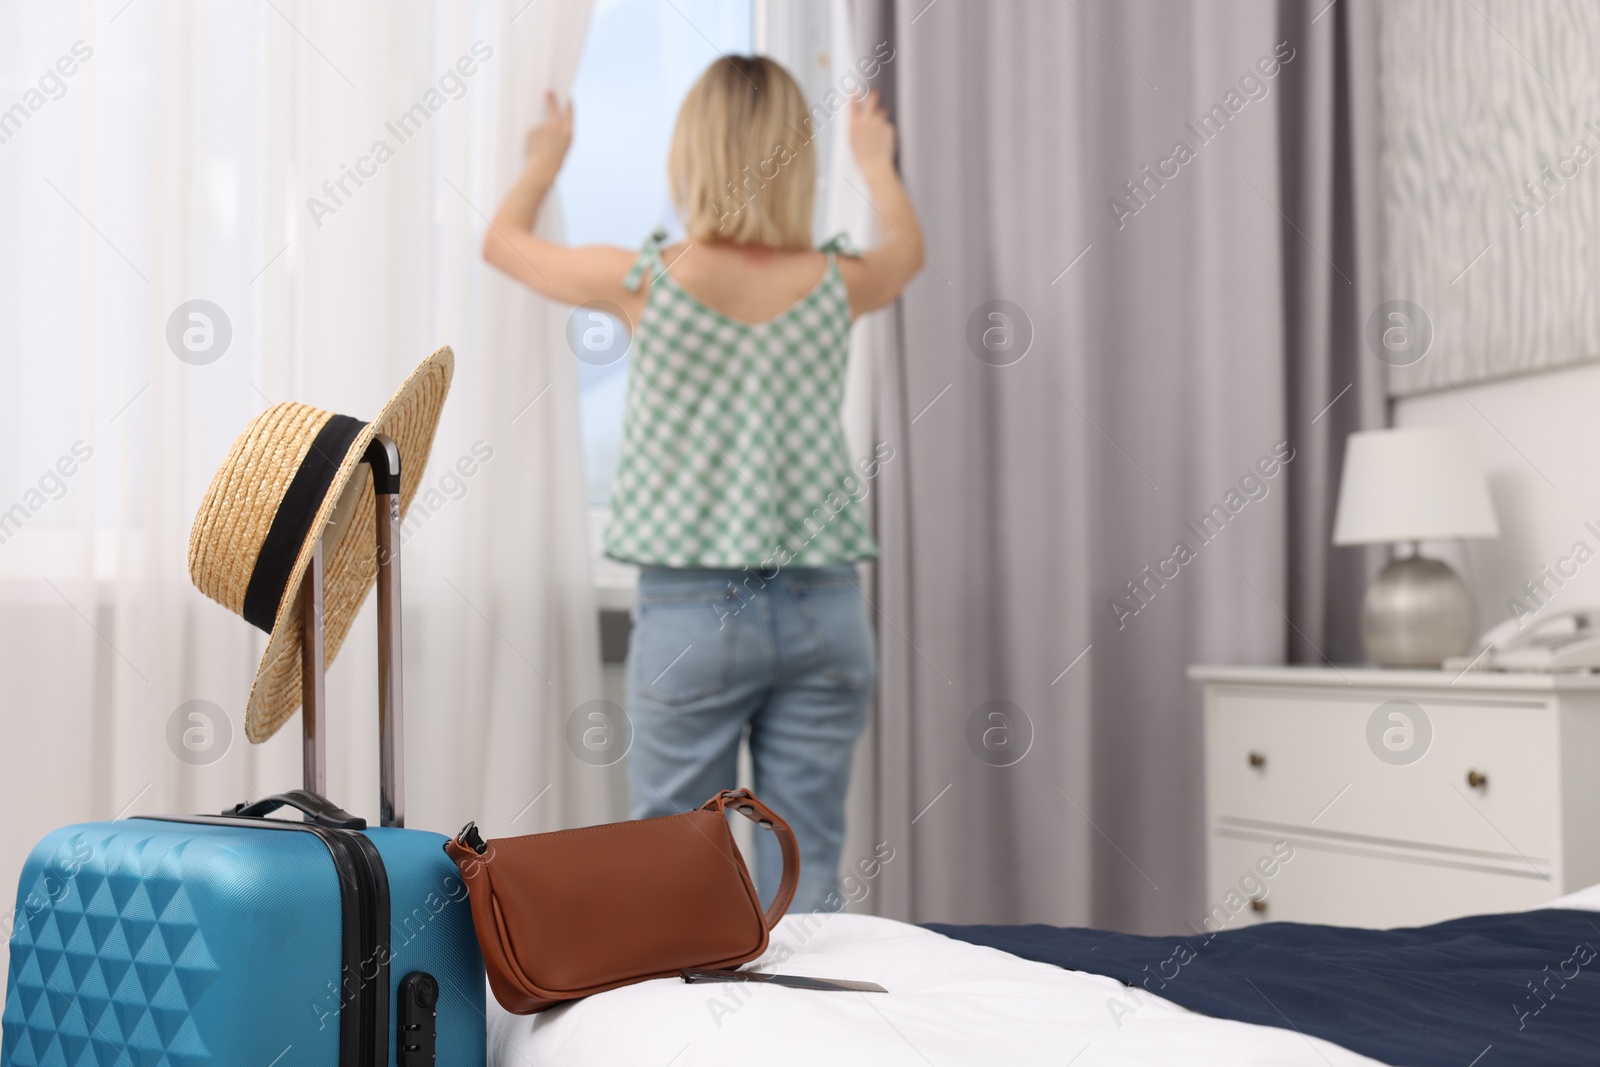 Photo of Guest opening curtains in stylish hotel room, selective focus